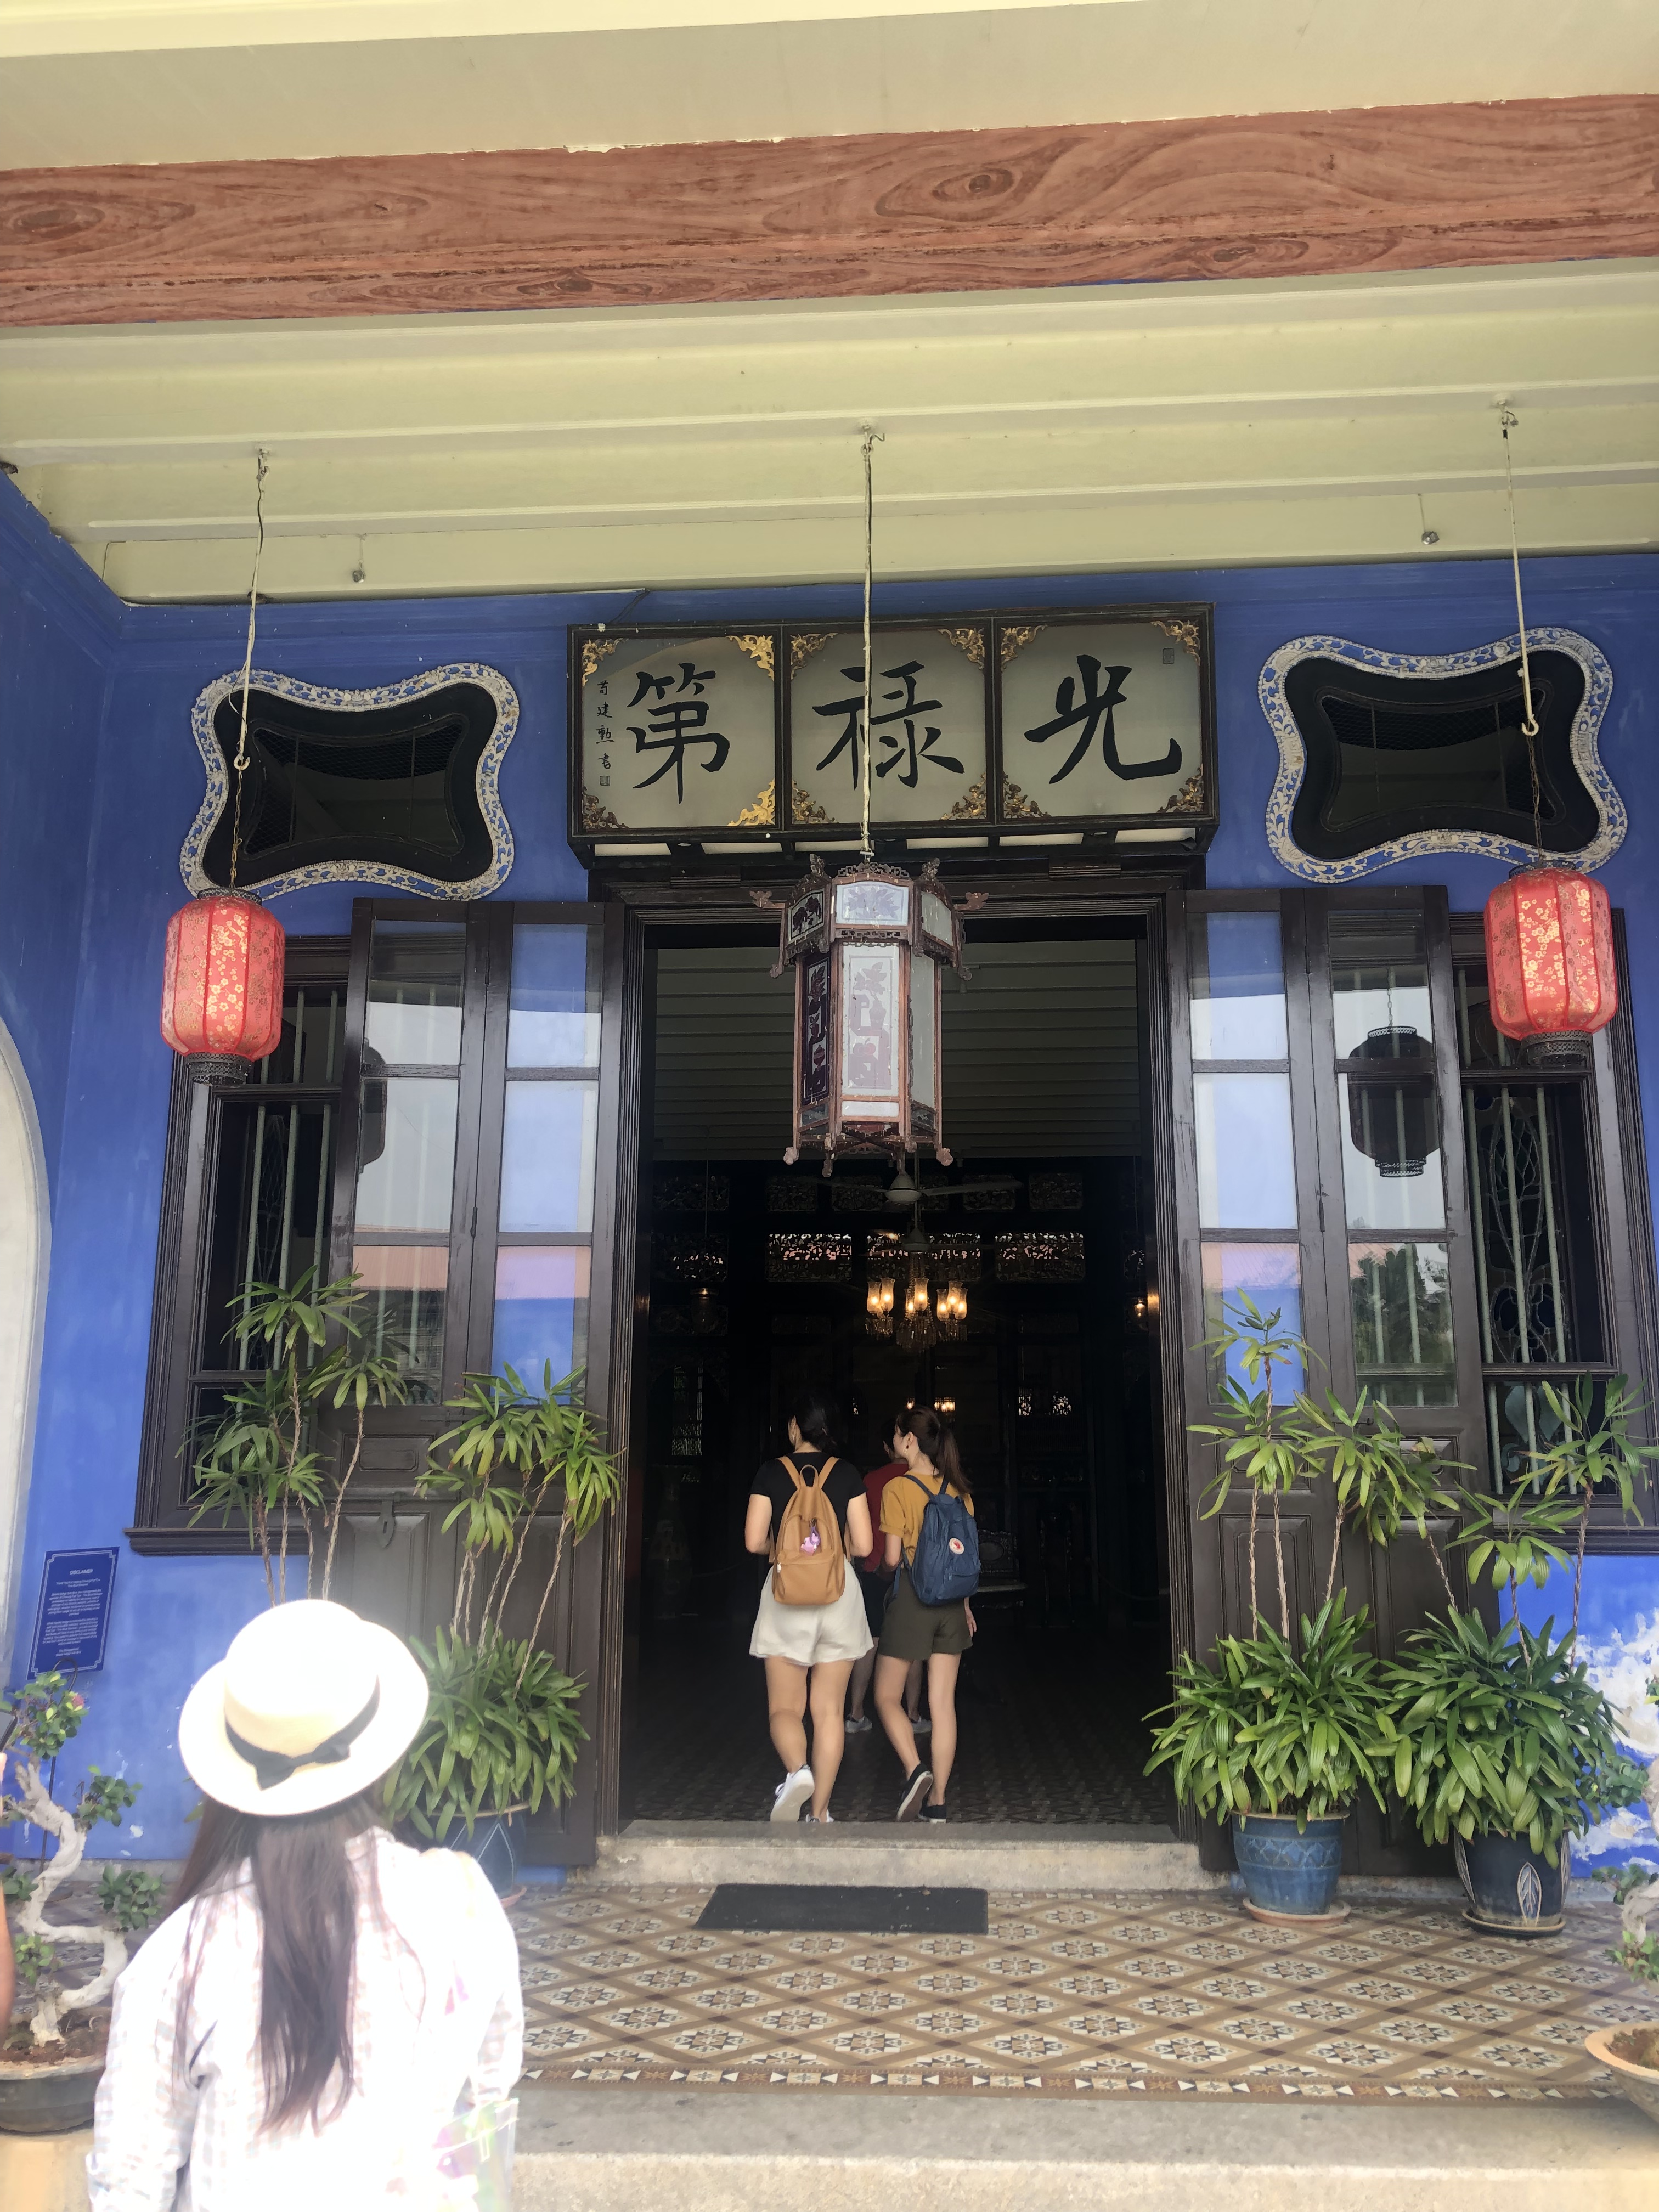 Tour to the Blue Mansion in Penang